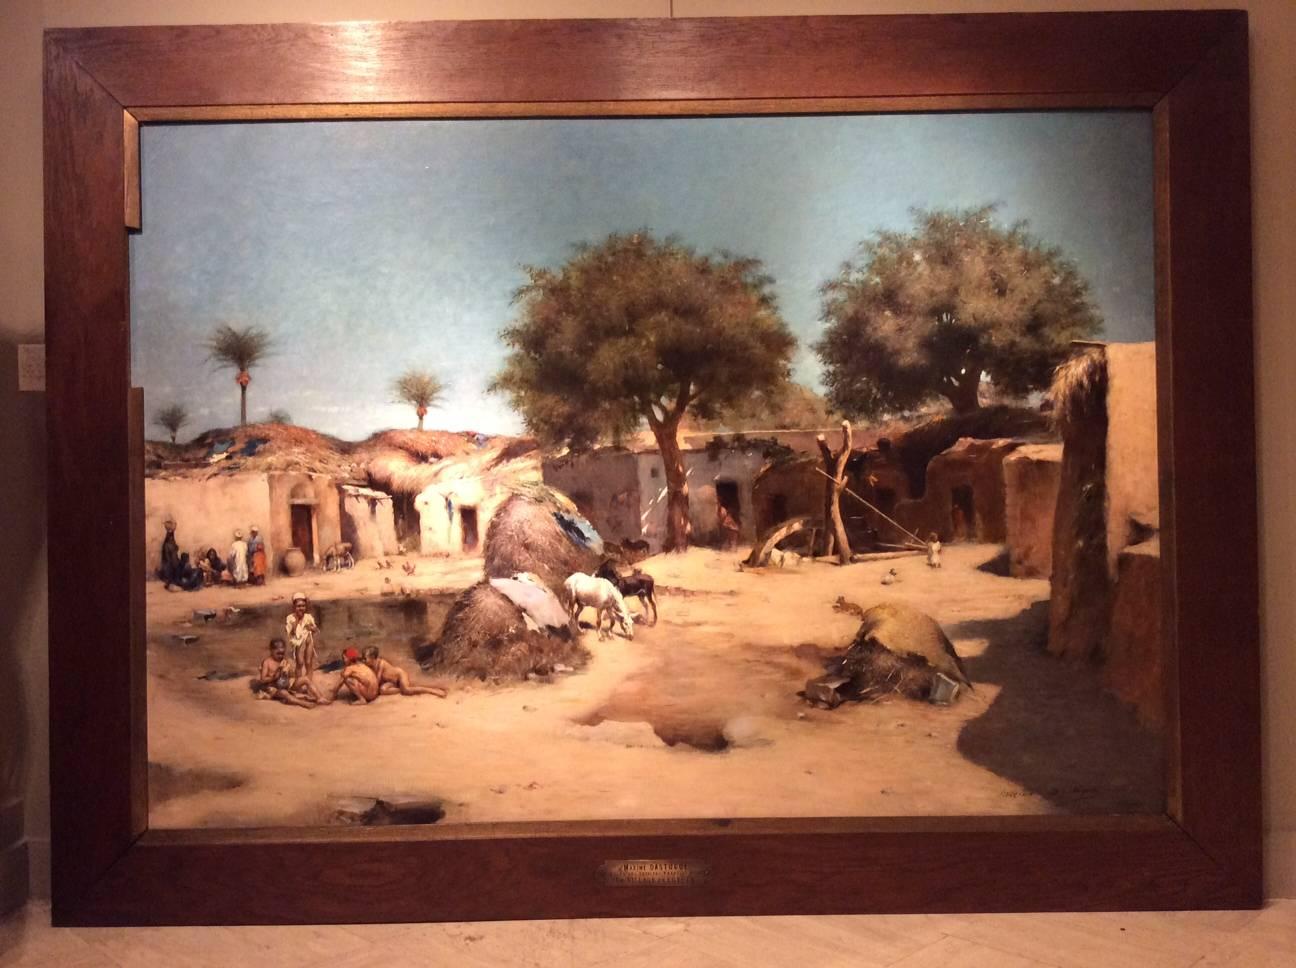 A village in Egypt, presented at the Salon des artistes in 1890, signed at the bottom right by Maxime Dastuge (1851-1909). Student of Jean-Leon Gérôme.
Exposed at the Salon from 1876-1908.
He travelled to Egypt often from 1889 onwards. Painted